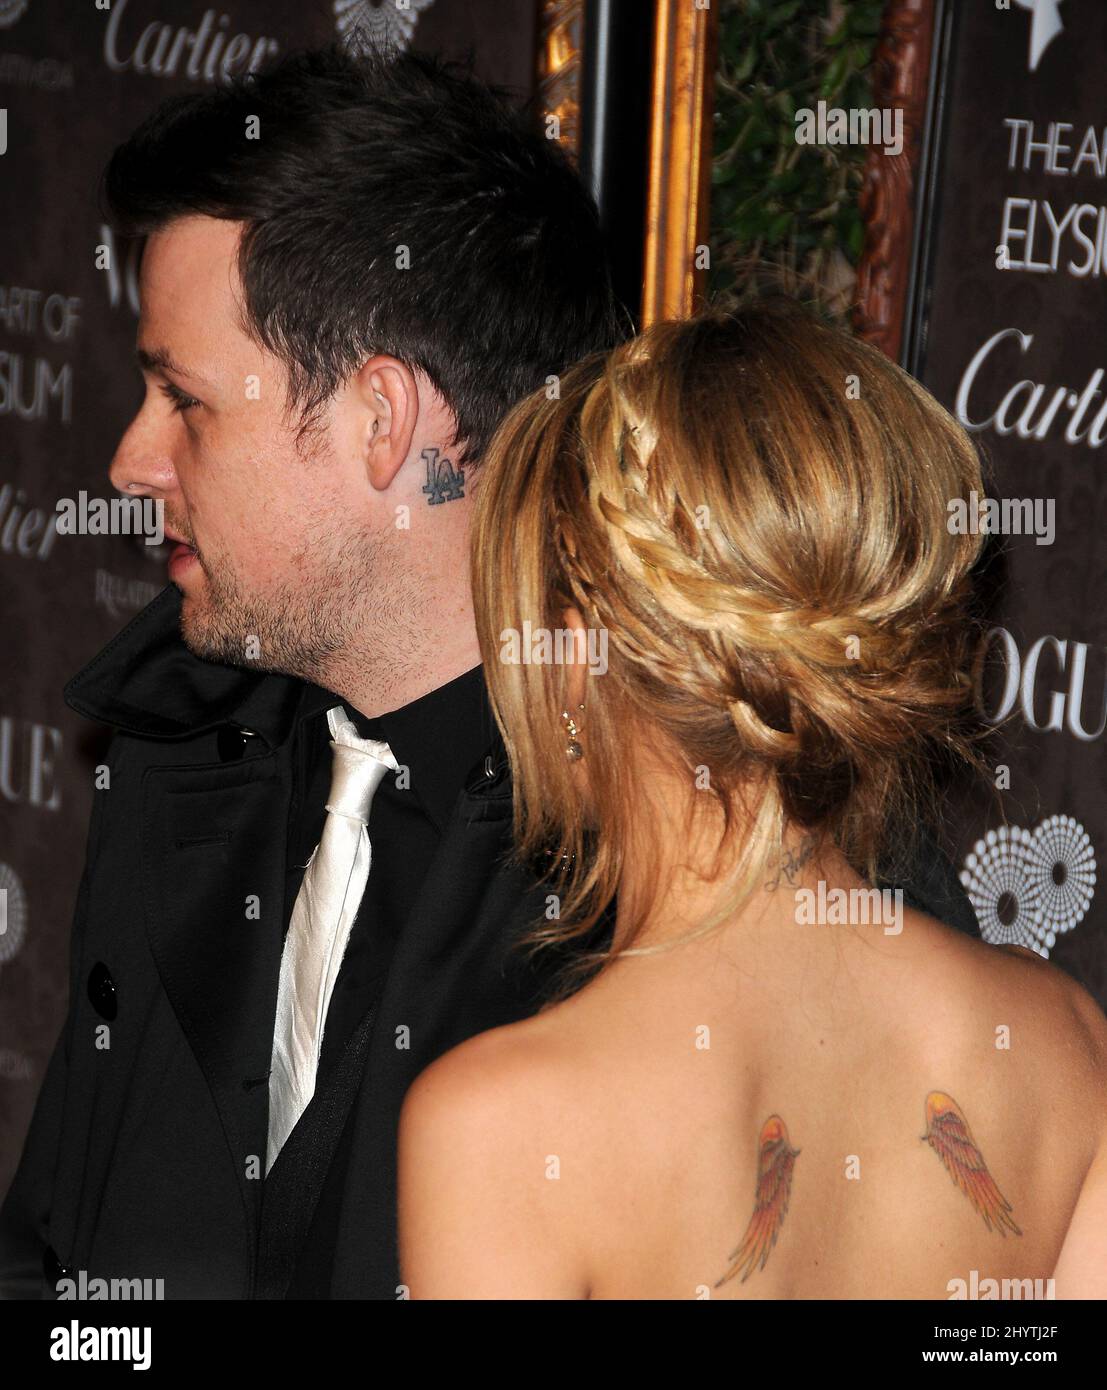 Nicole Richie and Joel Madden at The Art of Elysium 2nd Annual Heaven Gala held at The Vibiana. Stock Photo